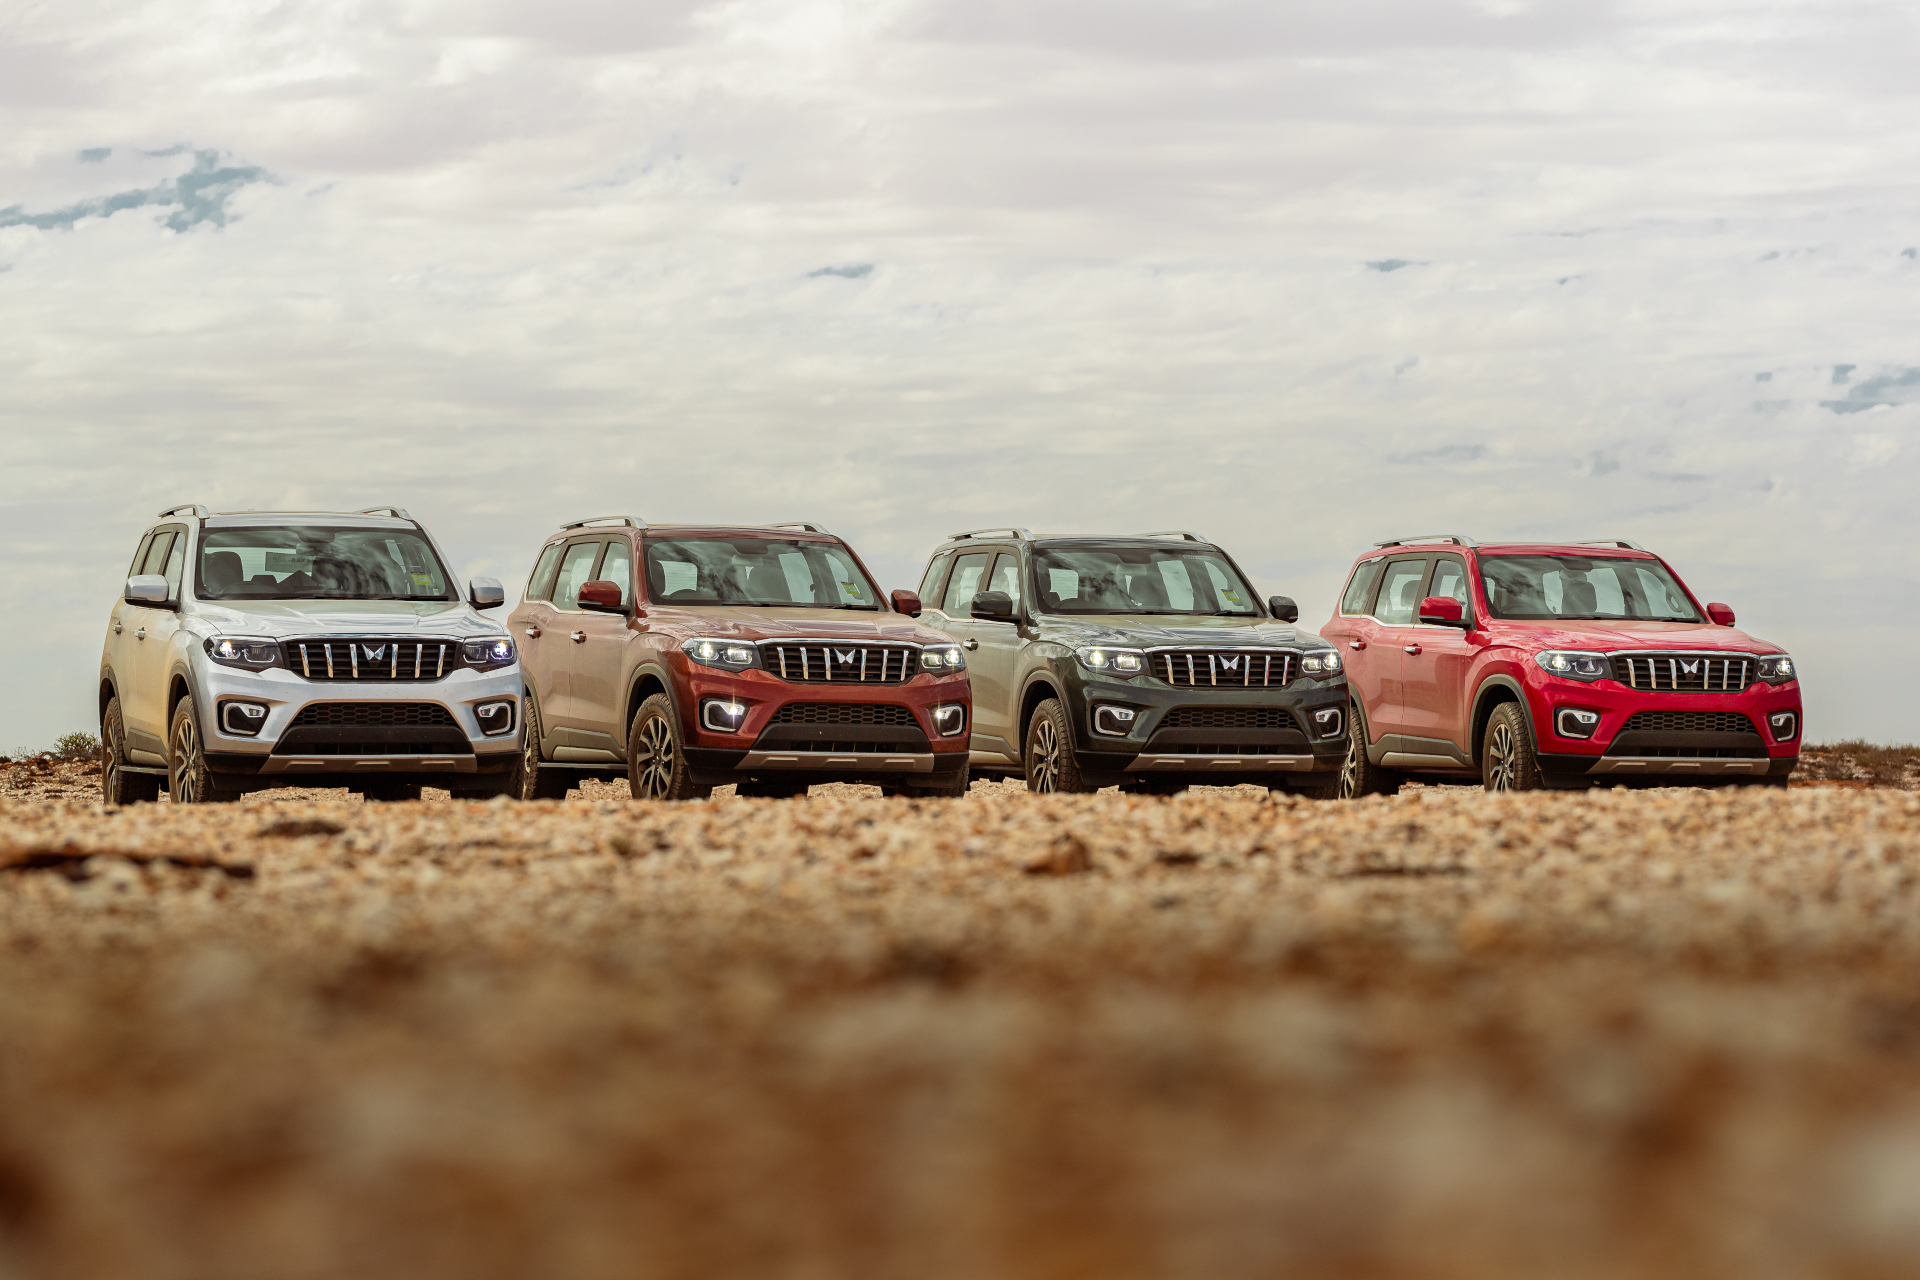 Unleash Real Adventure: All new Mahindra Scorpio- N on an expedition for real adventure!